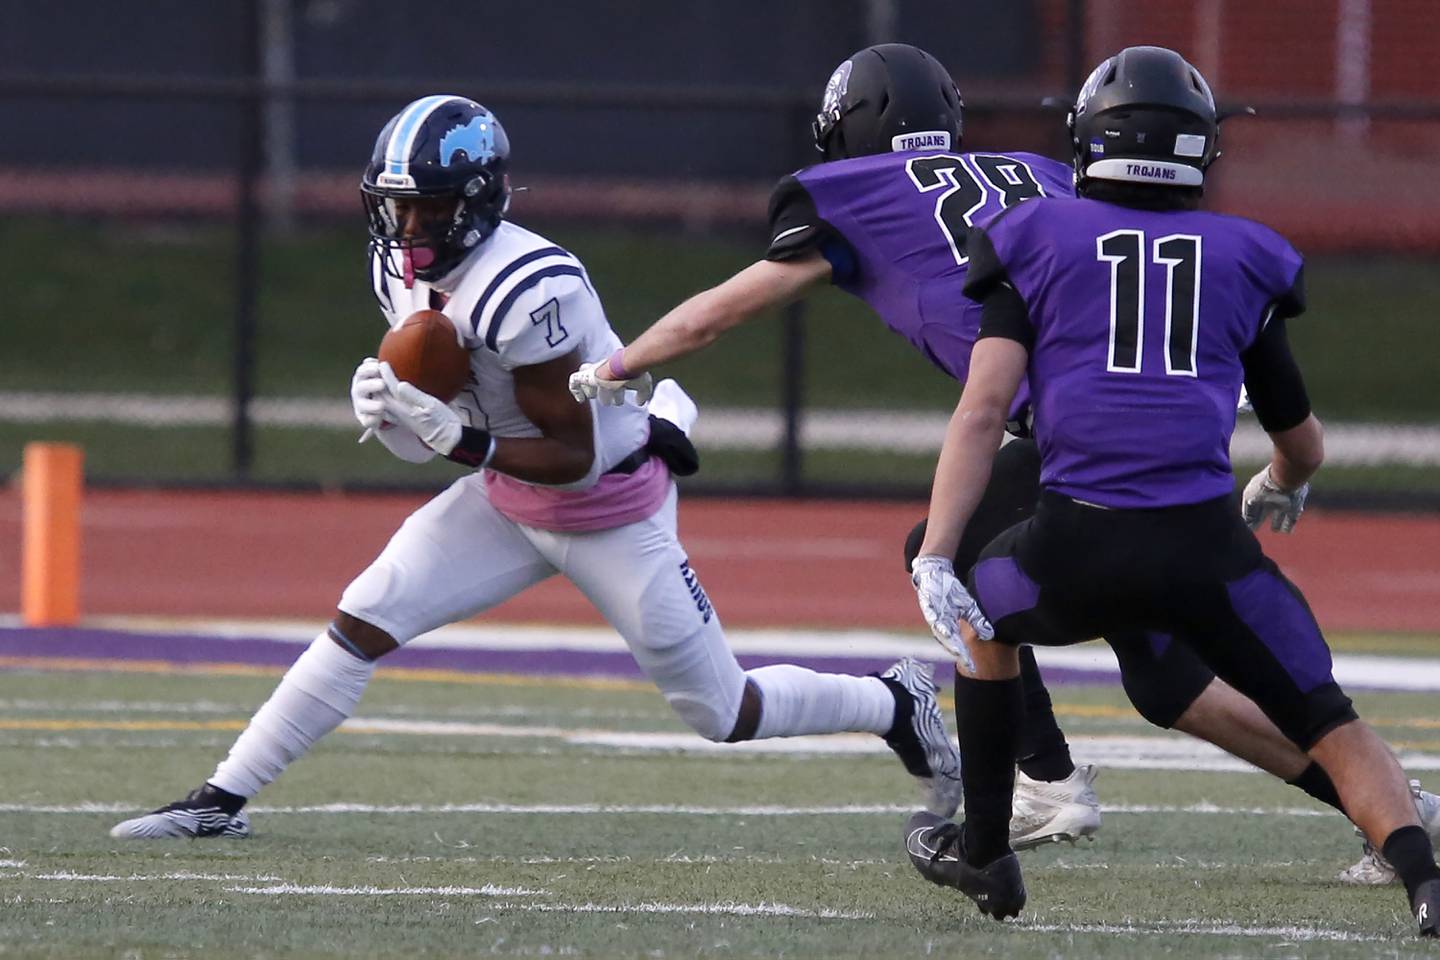 Downers Grove South’s Eli Reed (left) tries to avoid getting tackled by Downers Grove North’s Josh Lambert during their football game at Downers Grove North High School in Downers Grove on Friday, April 23, 2021.